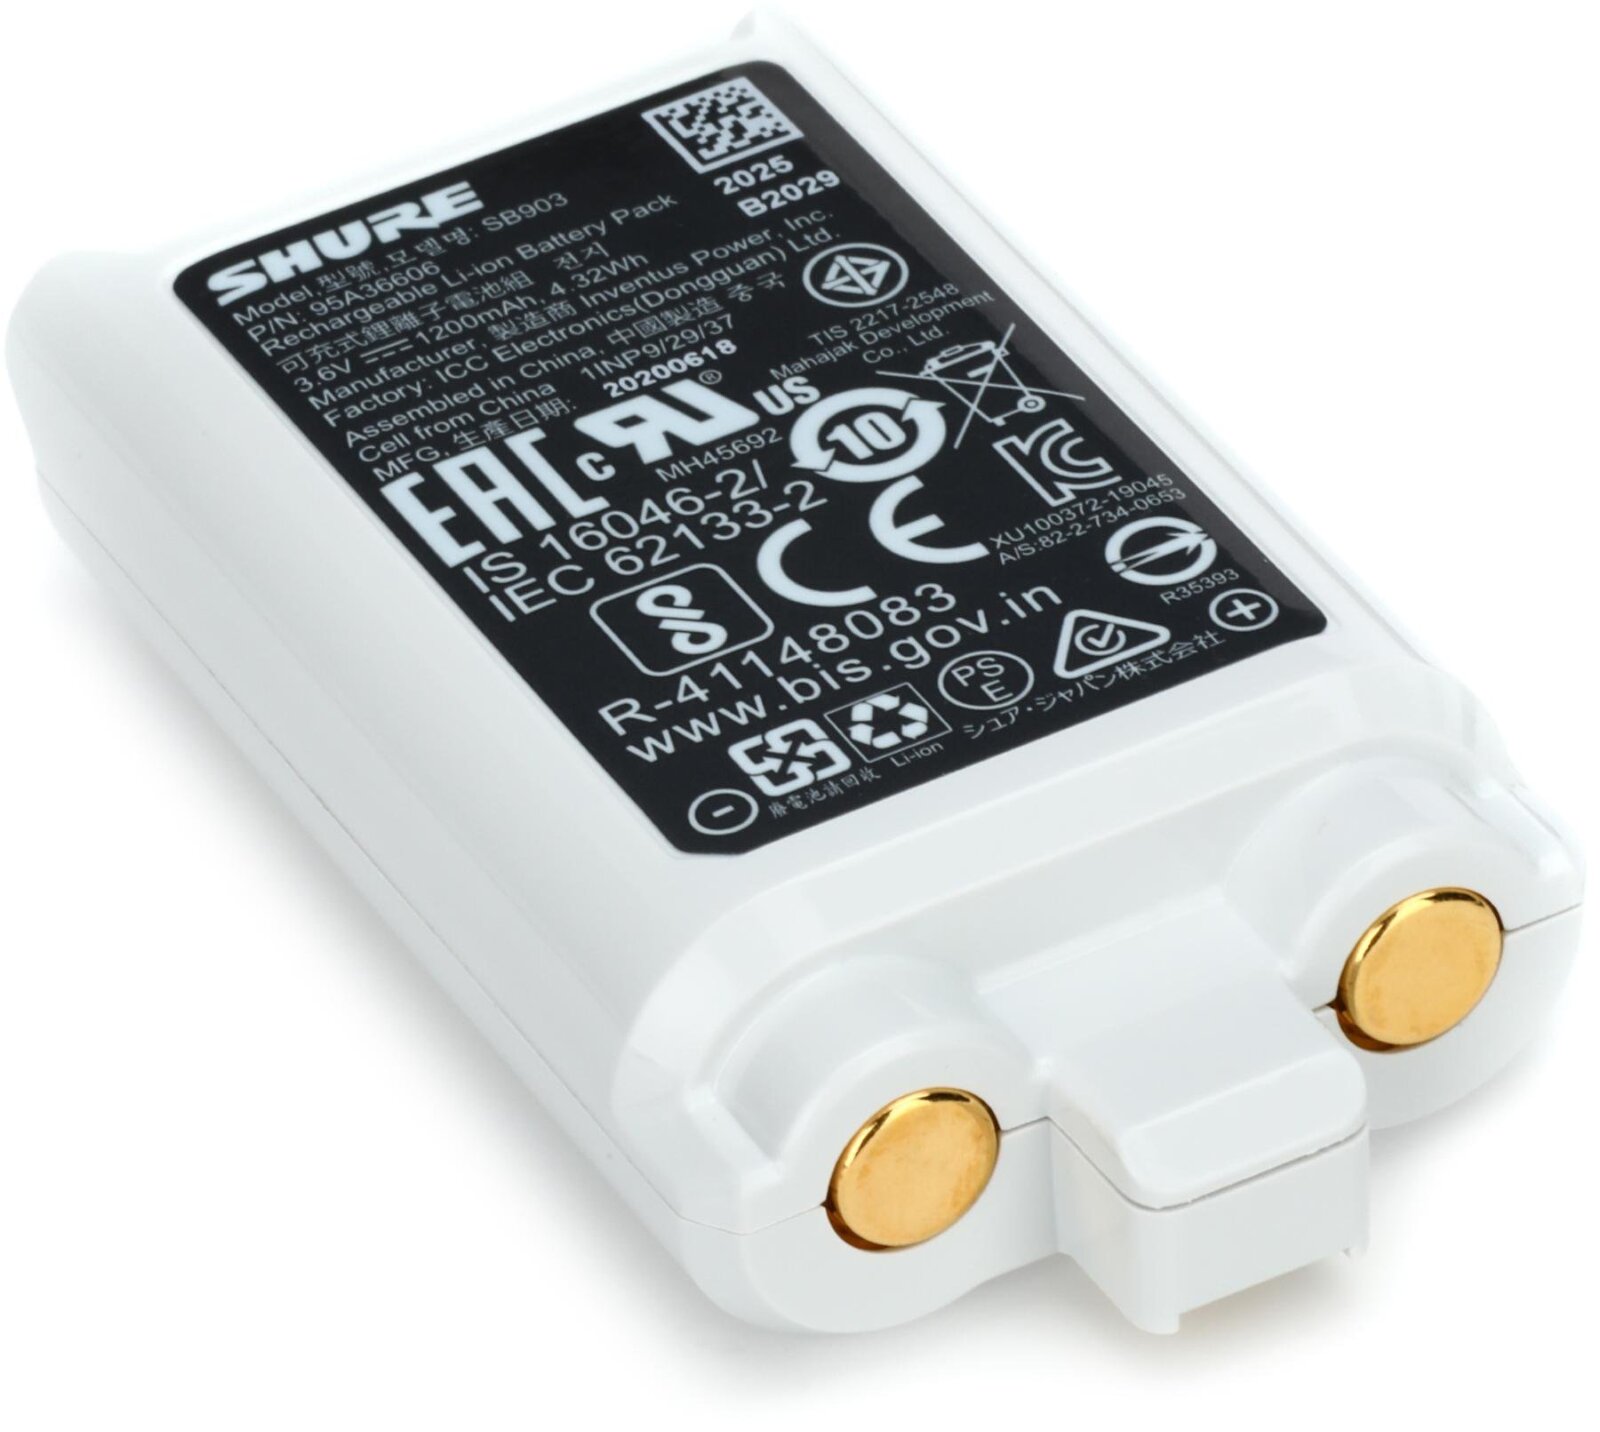 Shure Lithium-ion battery (3.6V / 1200mAh), runtime up to 8 hours (SB903) : photo 1